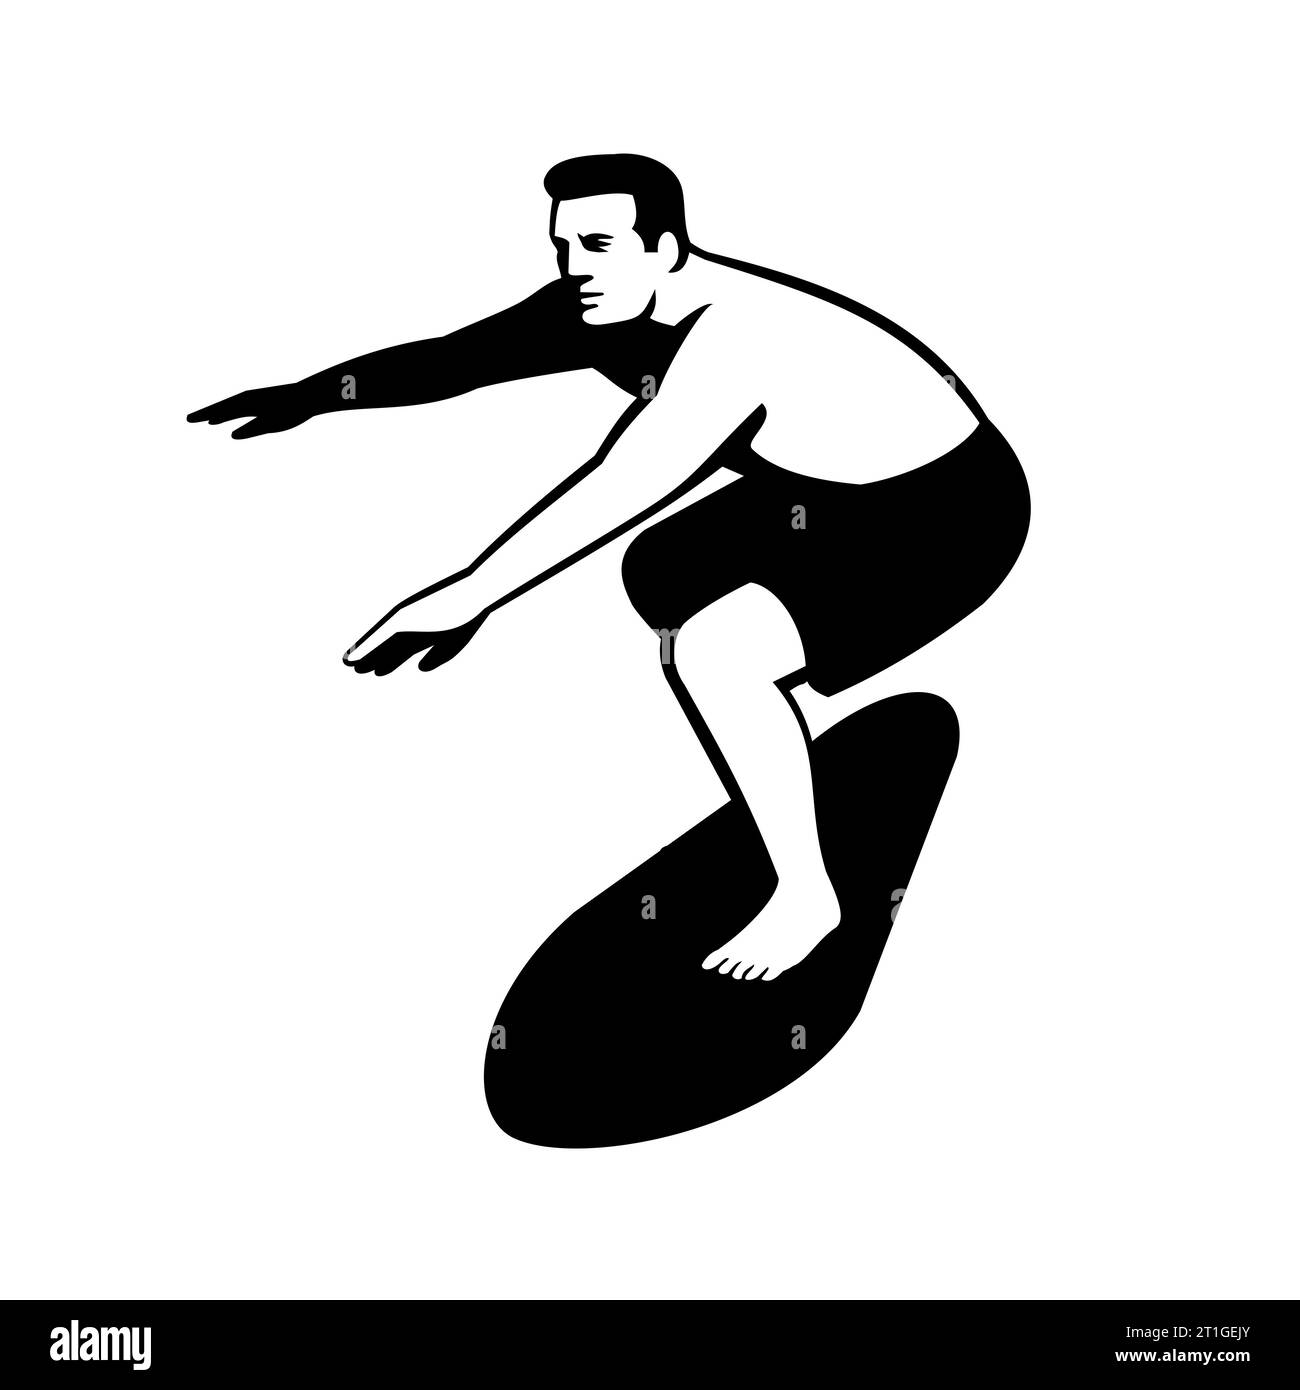 Retro style illustration of a male surfer on surf board surfing front view on isolated background done in black and white. Stock Photo